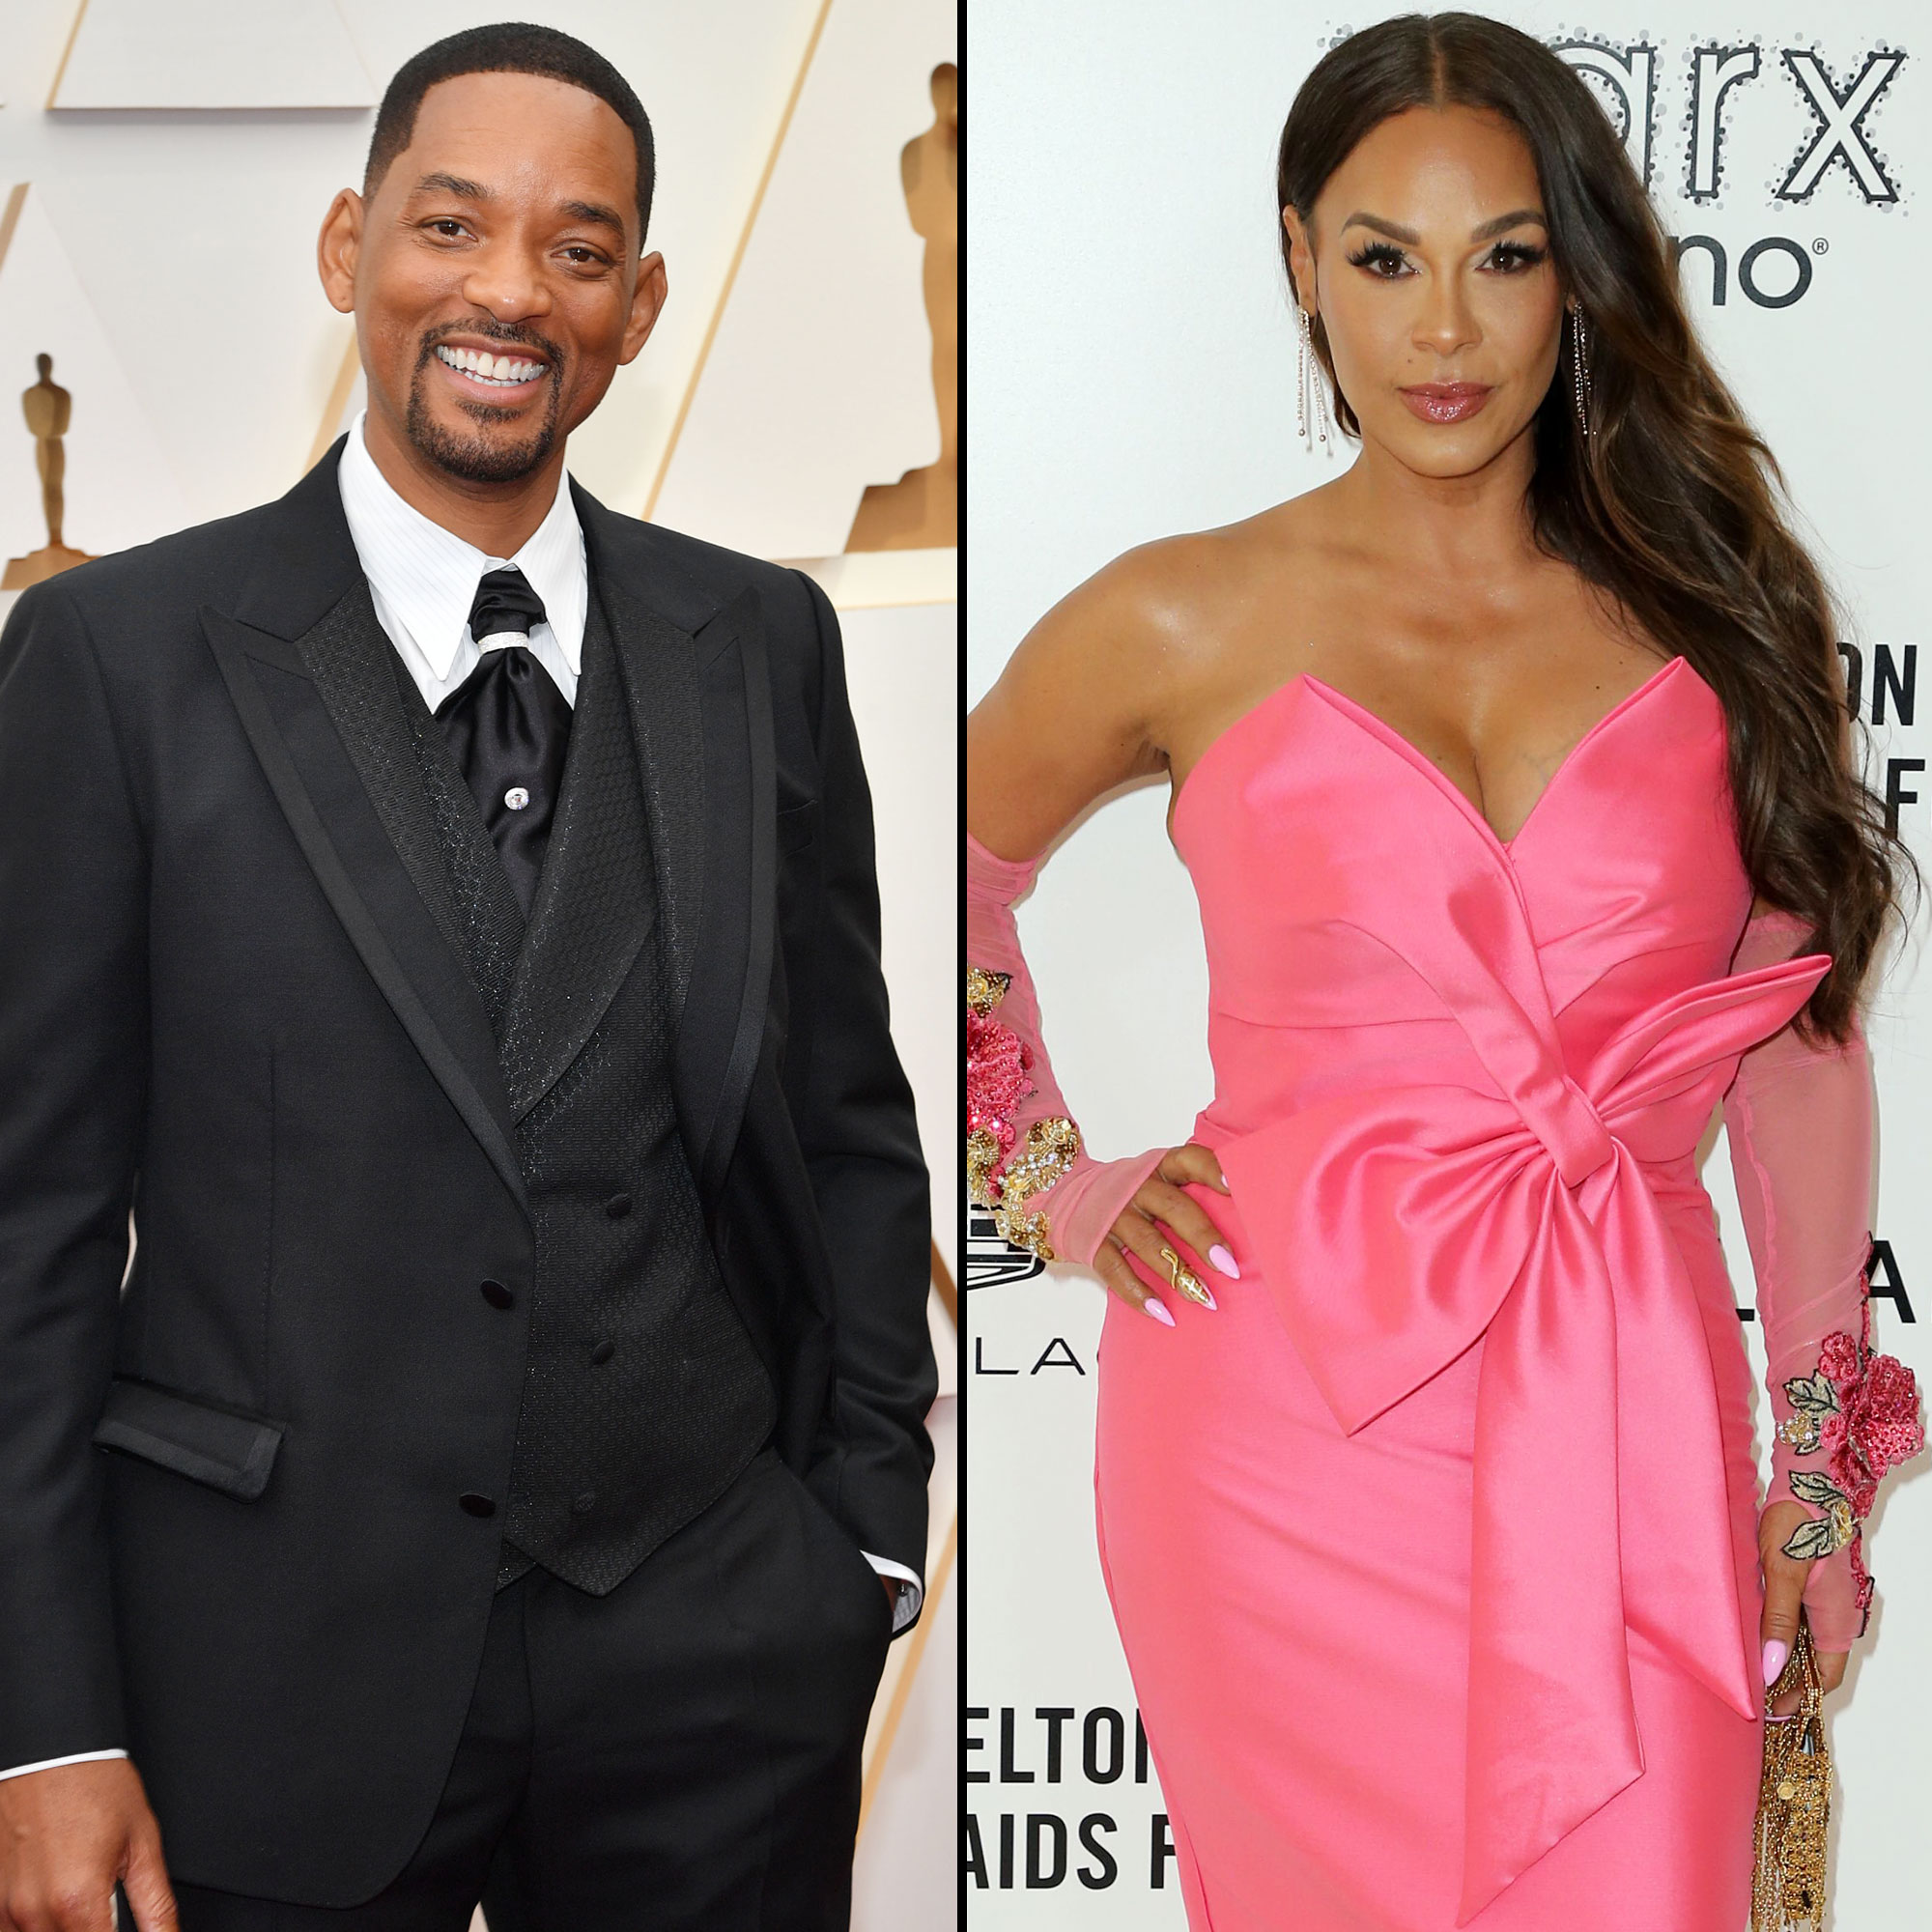 Will Smith Reunites With Ex-Wife Sheree Zampino After Oscars 2022 photo picture